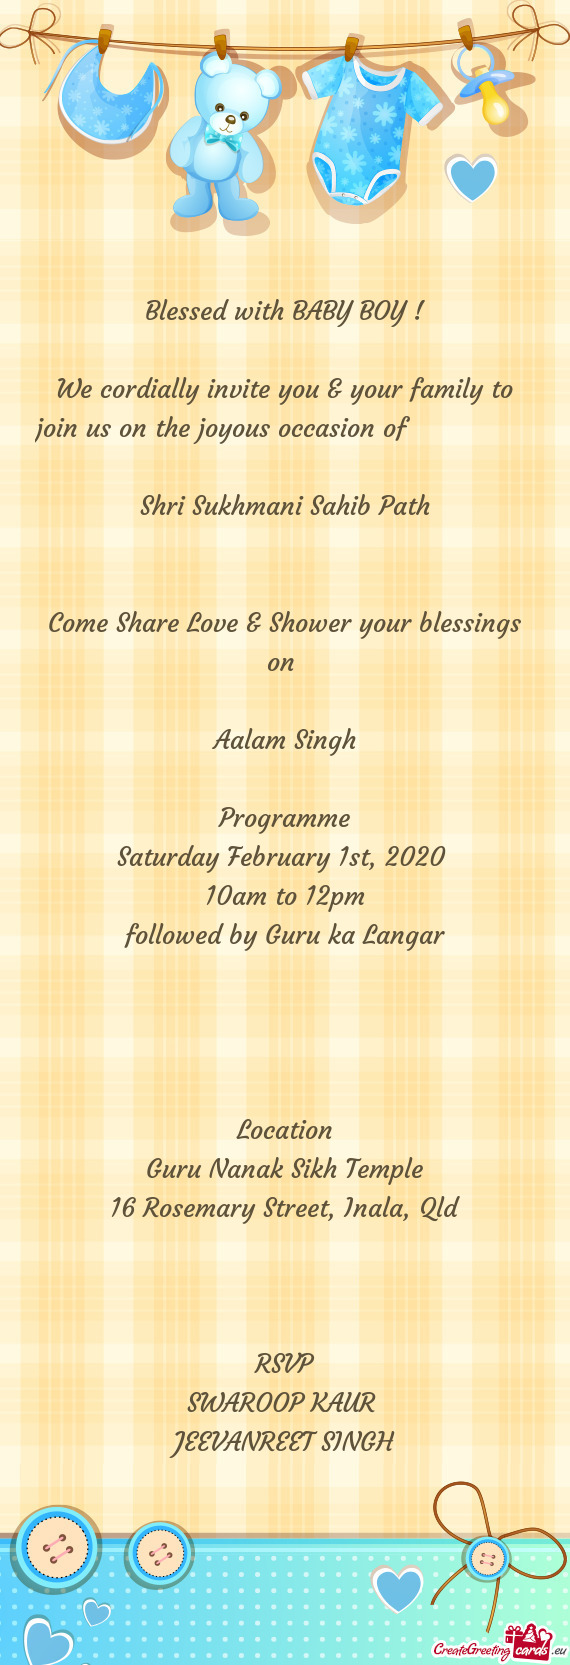 Come Share Love & Shower your blessings